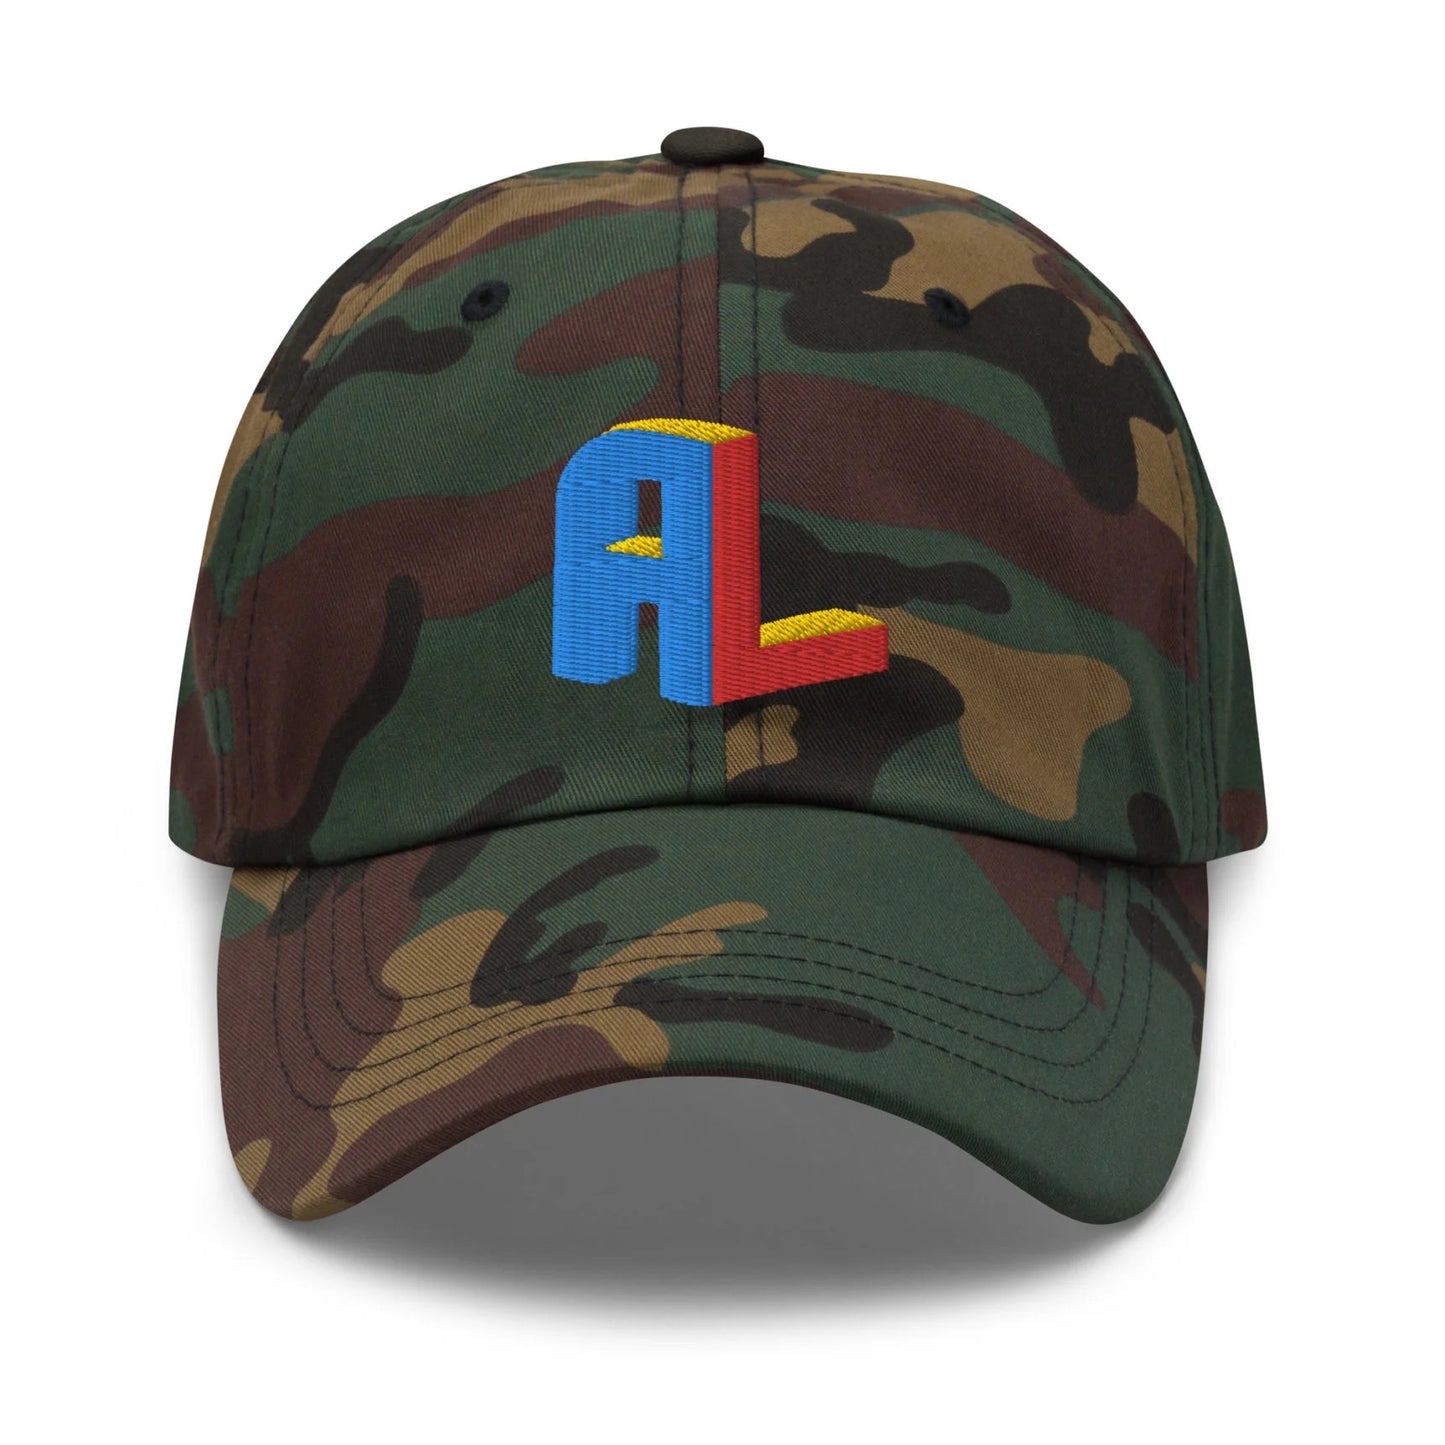 Ance Larmstrong ShowZone baseball dad hat in camo camouflage print